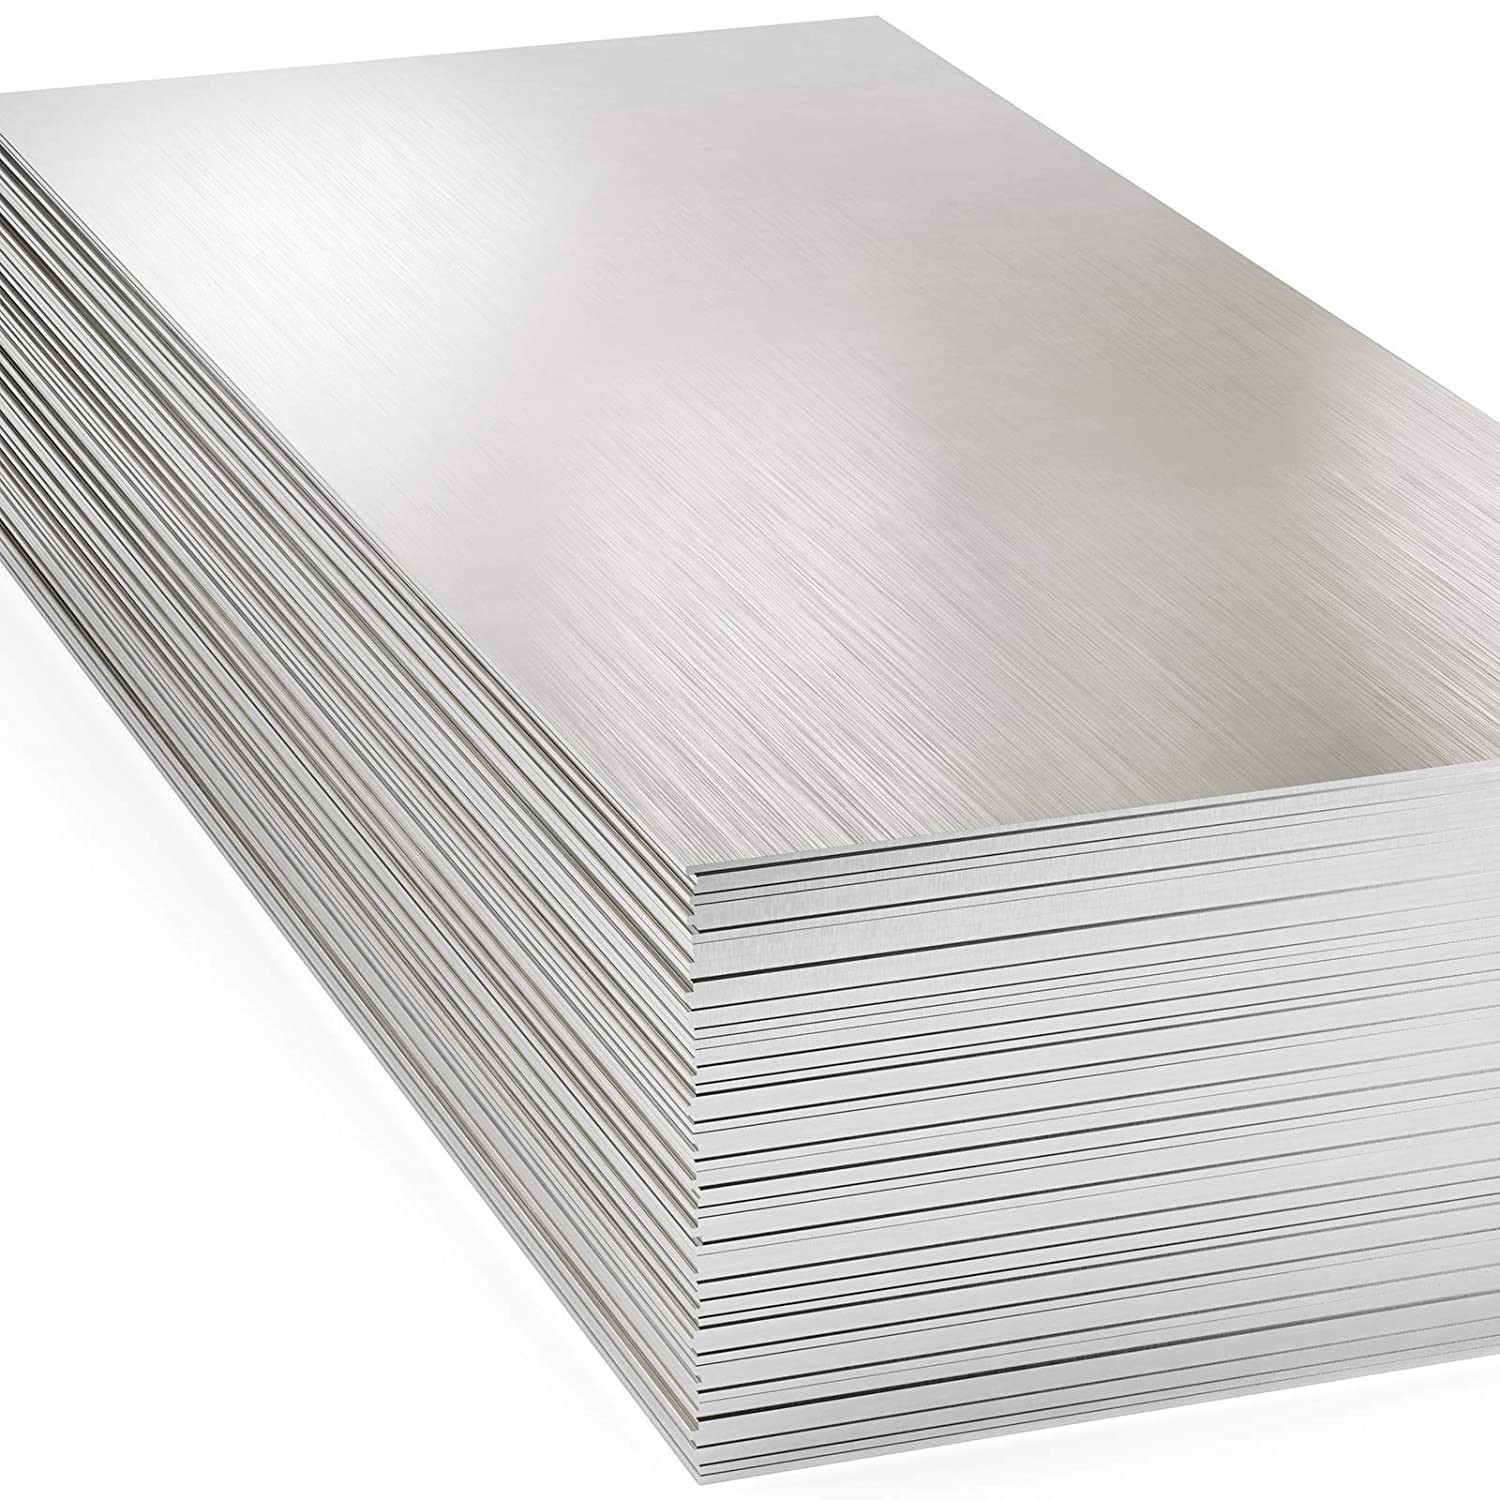 China AISI ASTM 304L Stainless Steel Metal Sheet Cold Rolled 0.3mm 3mm wholesale